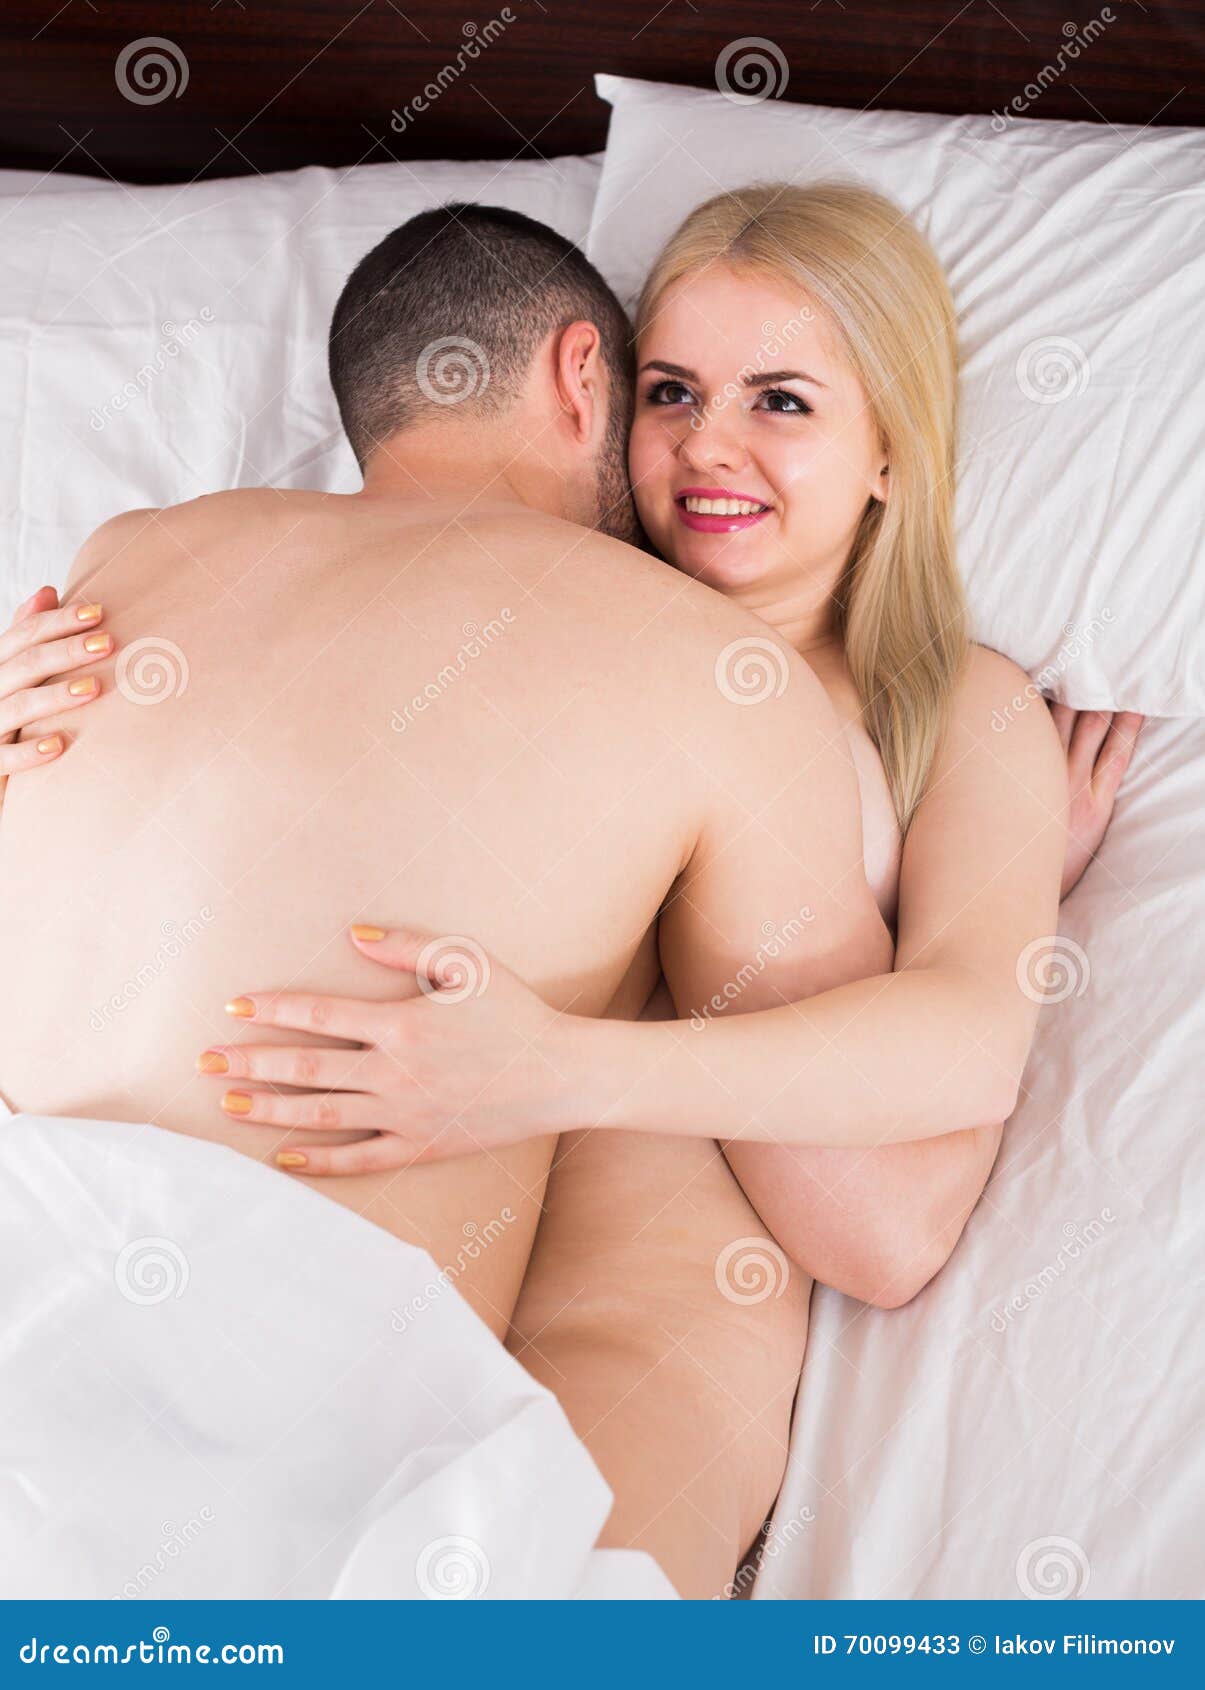 Young couple having sex stock image. Image of dating - 70099433